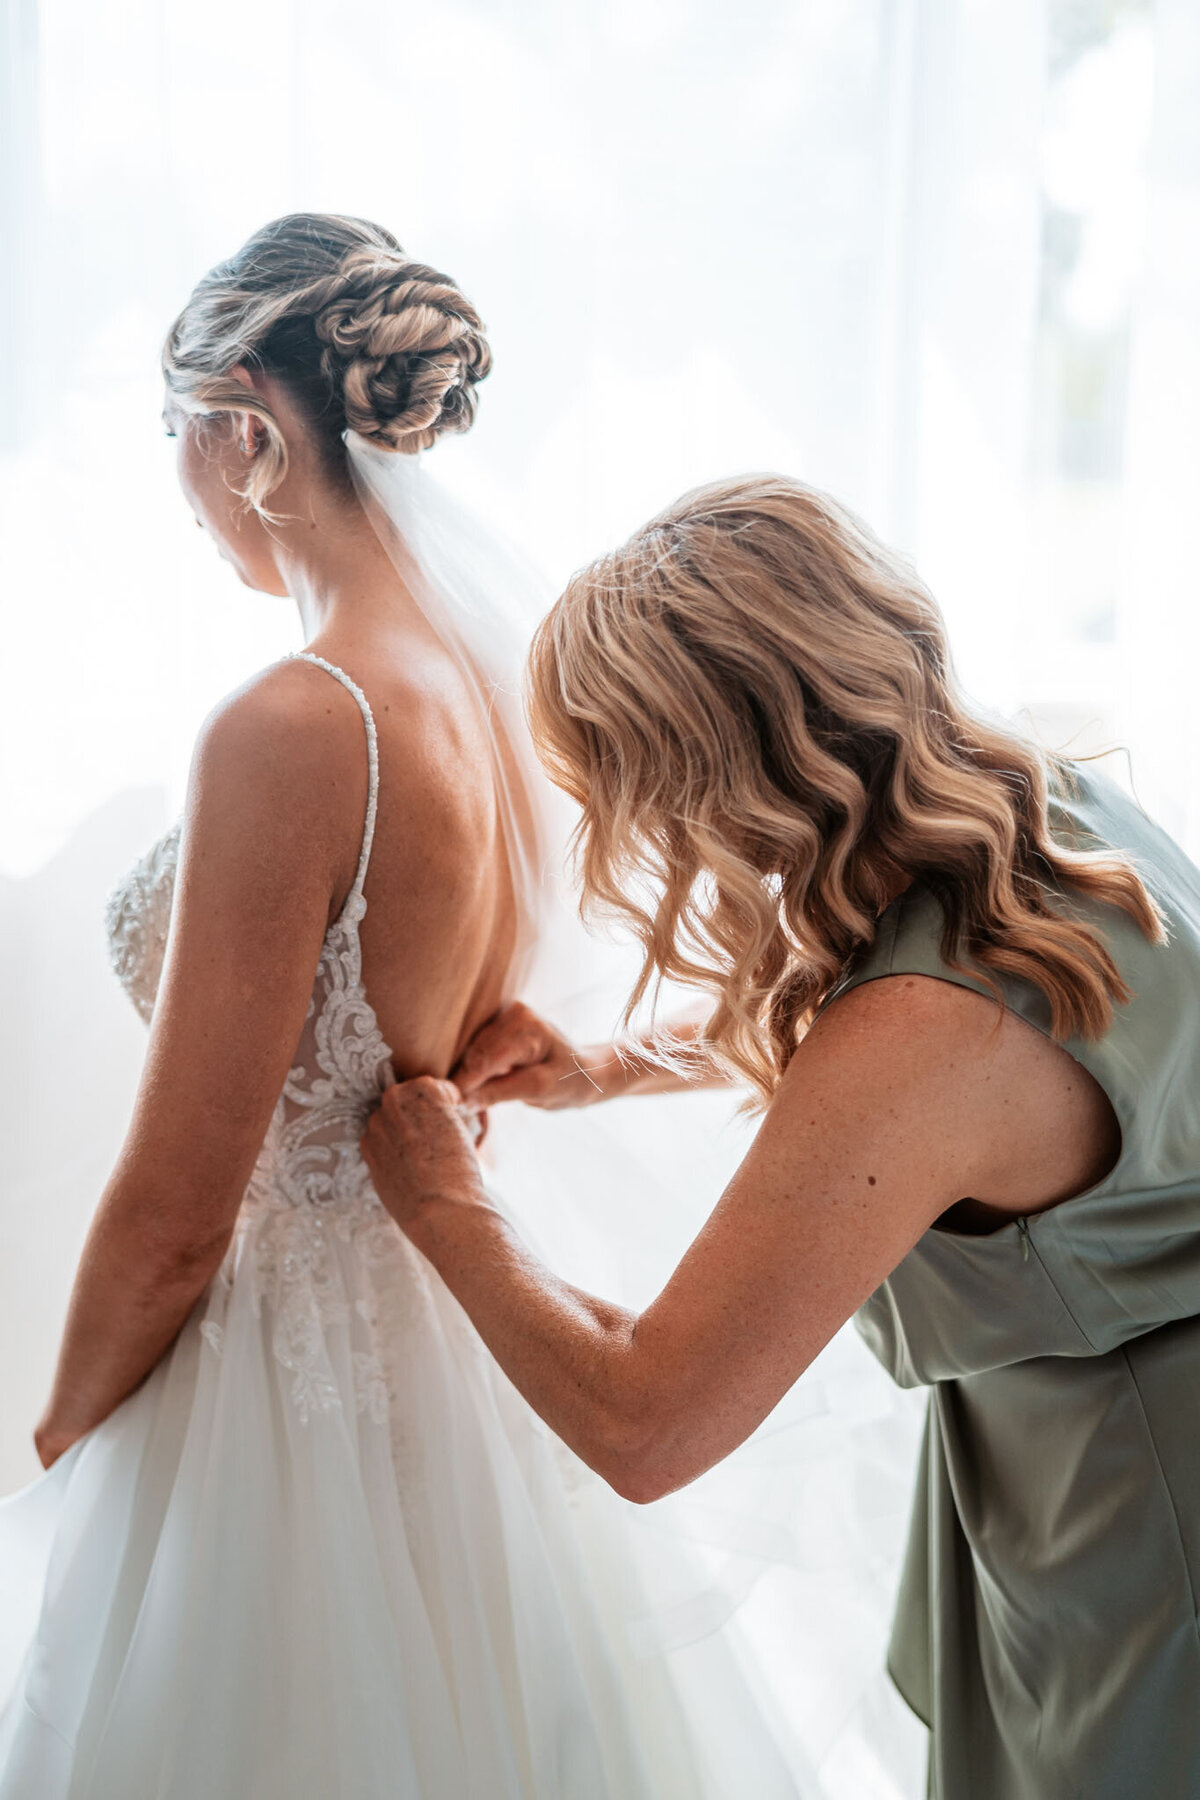 Emily getting her wedding dress perfectly ready for her wedding ceremony